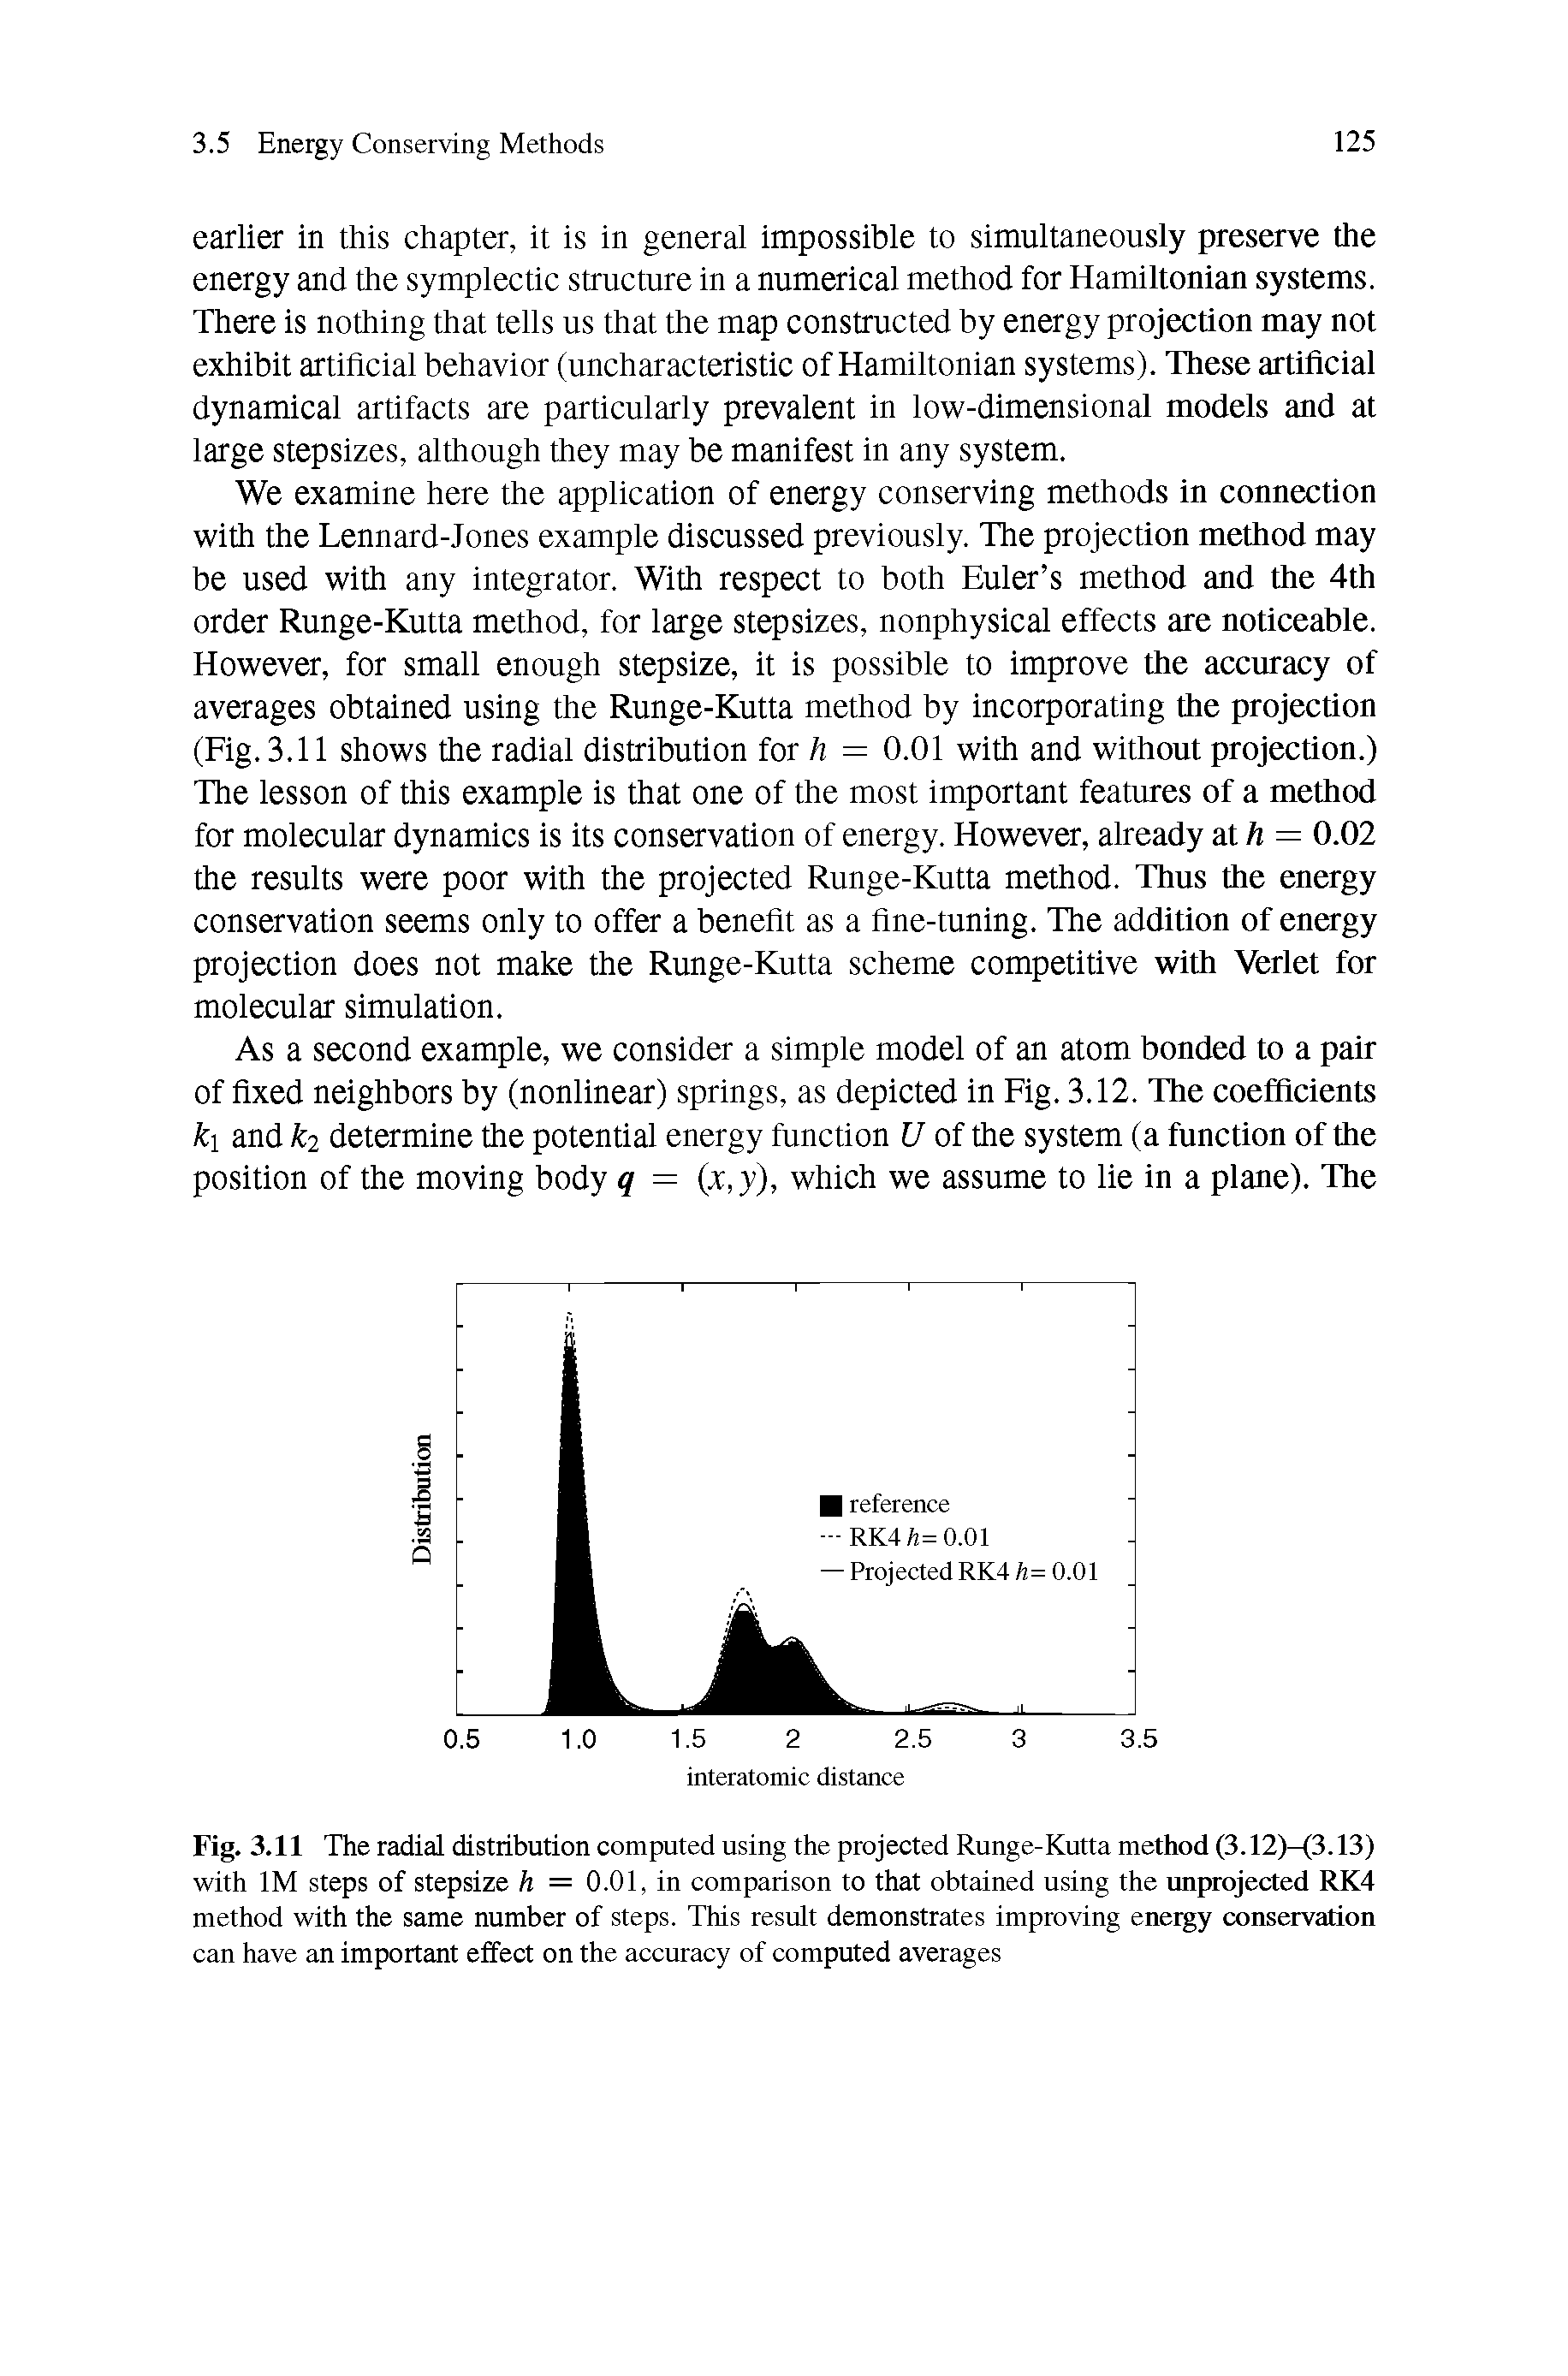 Fig. 3.11 The radial distribution computed using the projected Runge-Kutta method (3.12)-(3.13) with IM steps of stepsize h = 0.01, in comparison to that obtained using the unprojected RK4 method with the same number of steps. This result demonstrates improving energy conservation can have an important effect on the accuracy of computed averages...